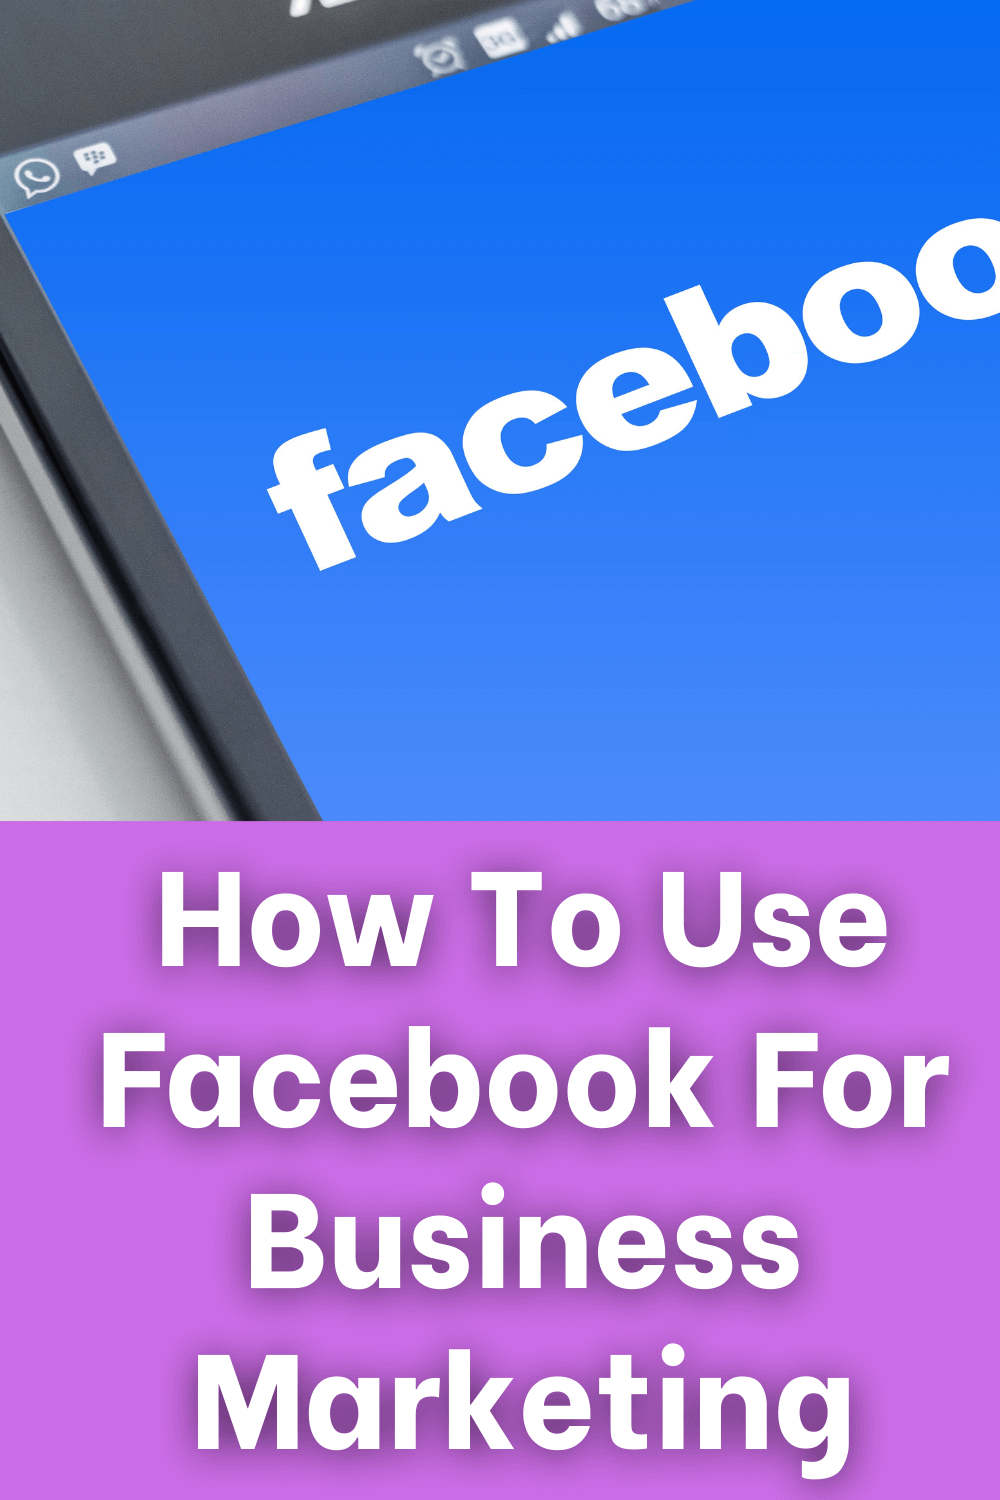 How To Use Facebook For Business Marketing